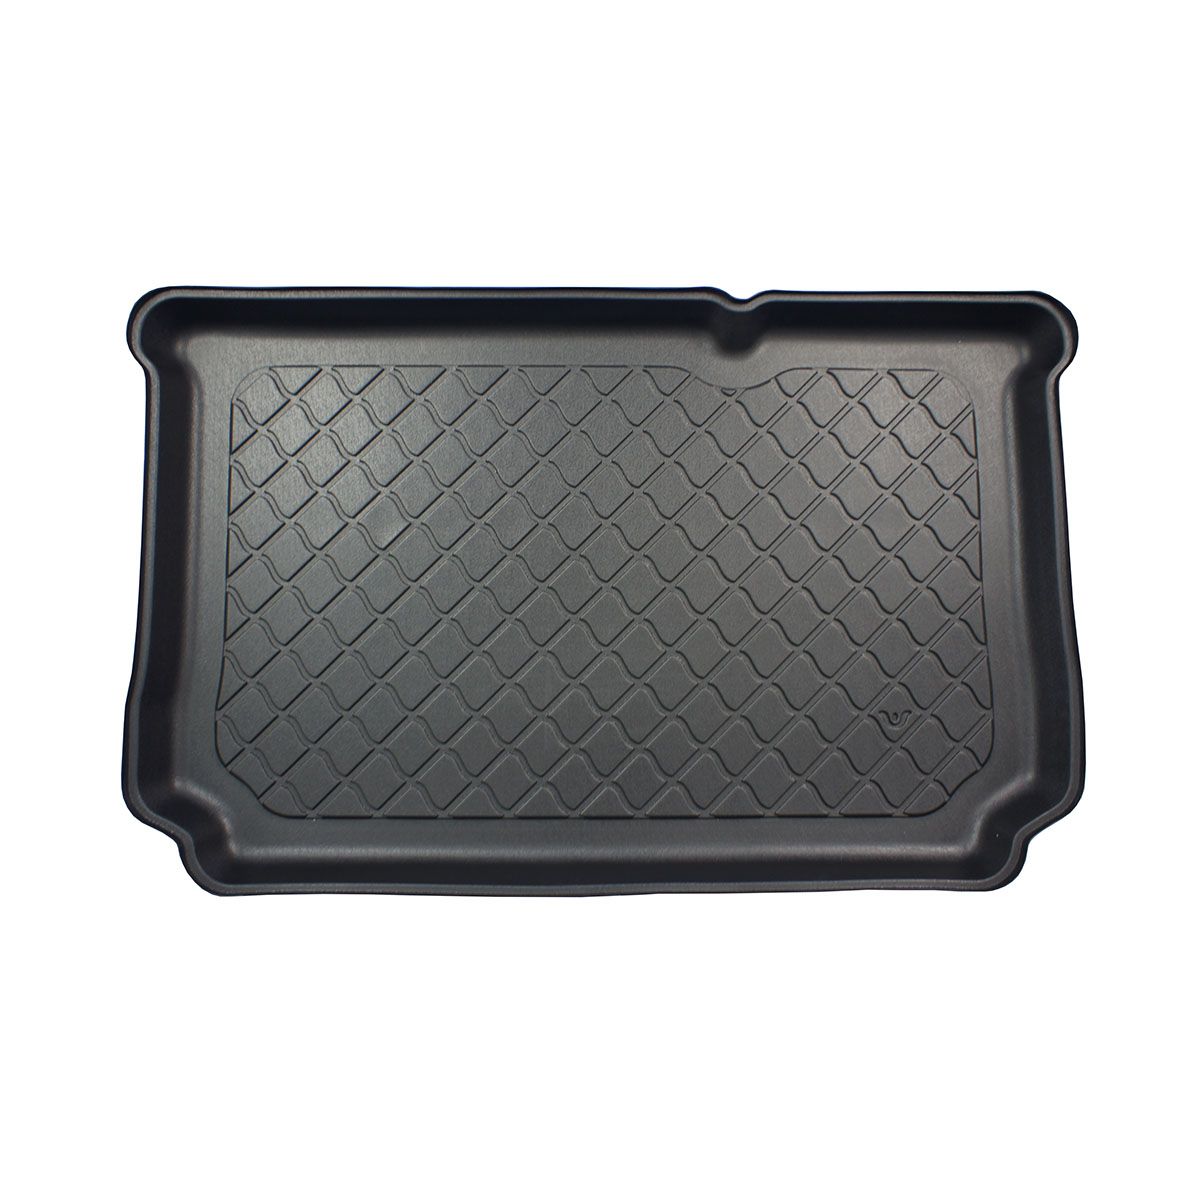 Ford Fiesta (2017 onwards) Moulded Boot Mat product image